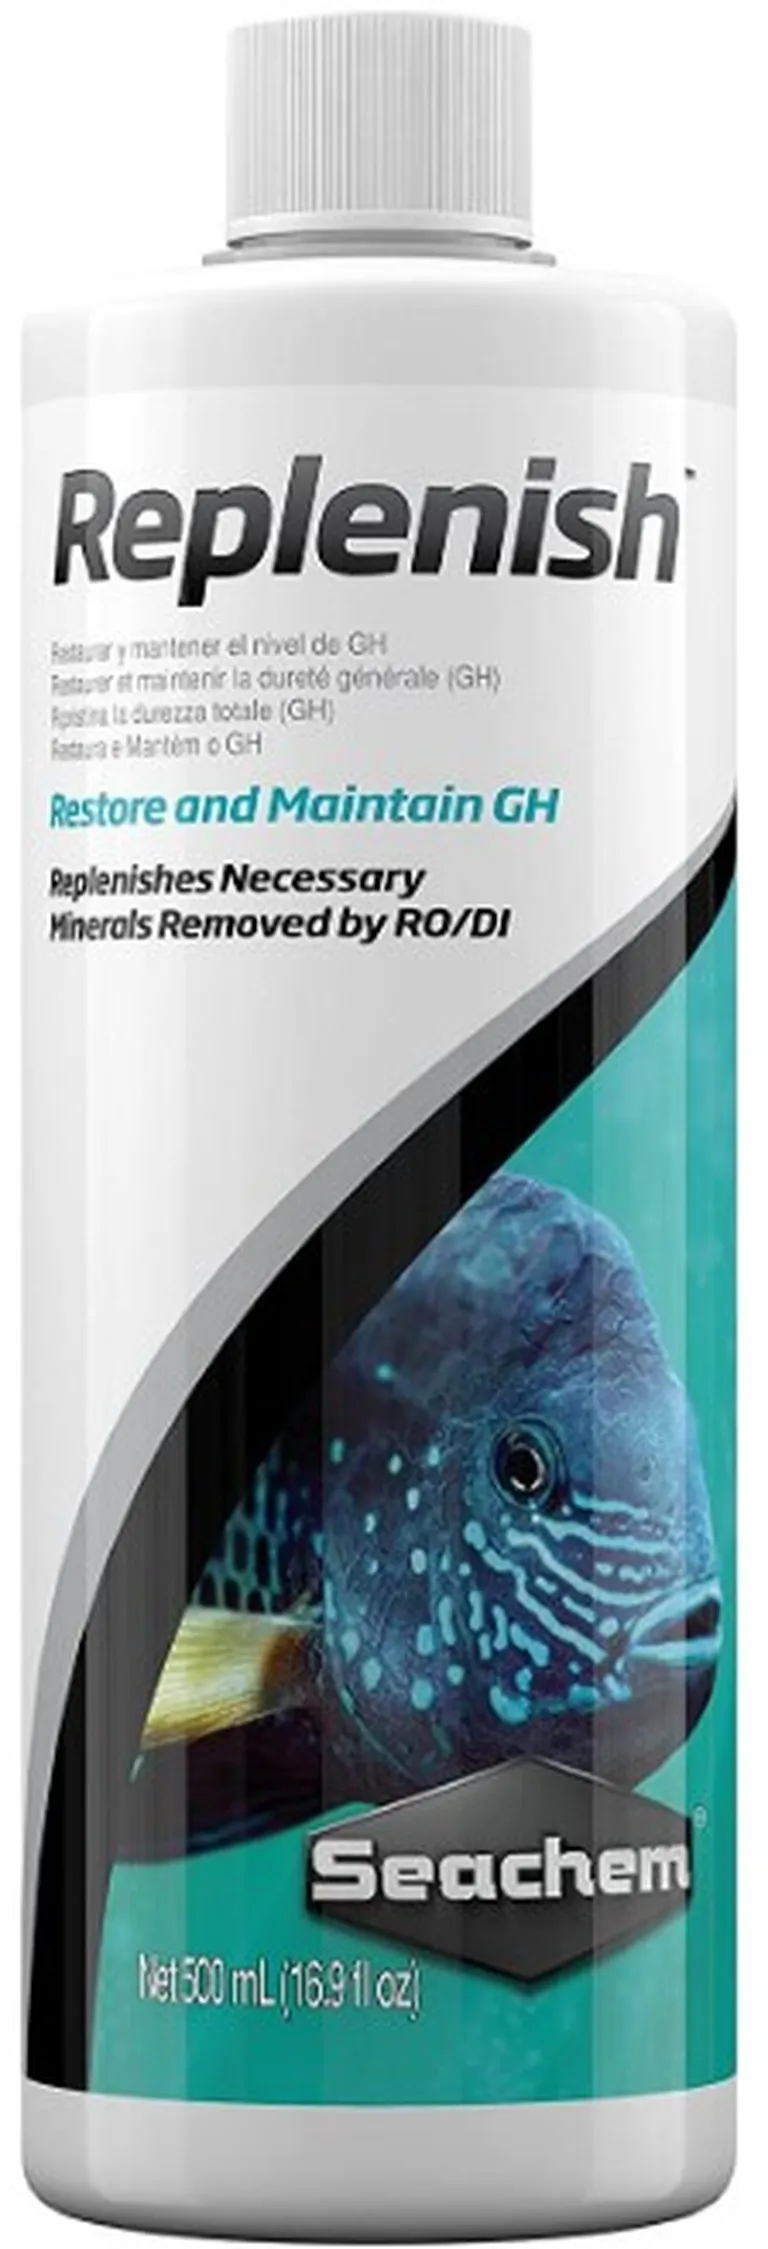 Seachem Replenish Restores and Maintains GH in Aquariums Photo 1